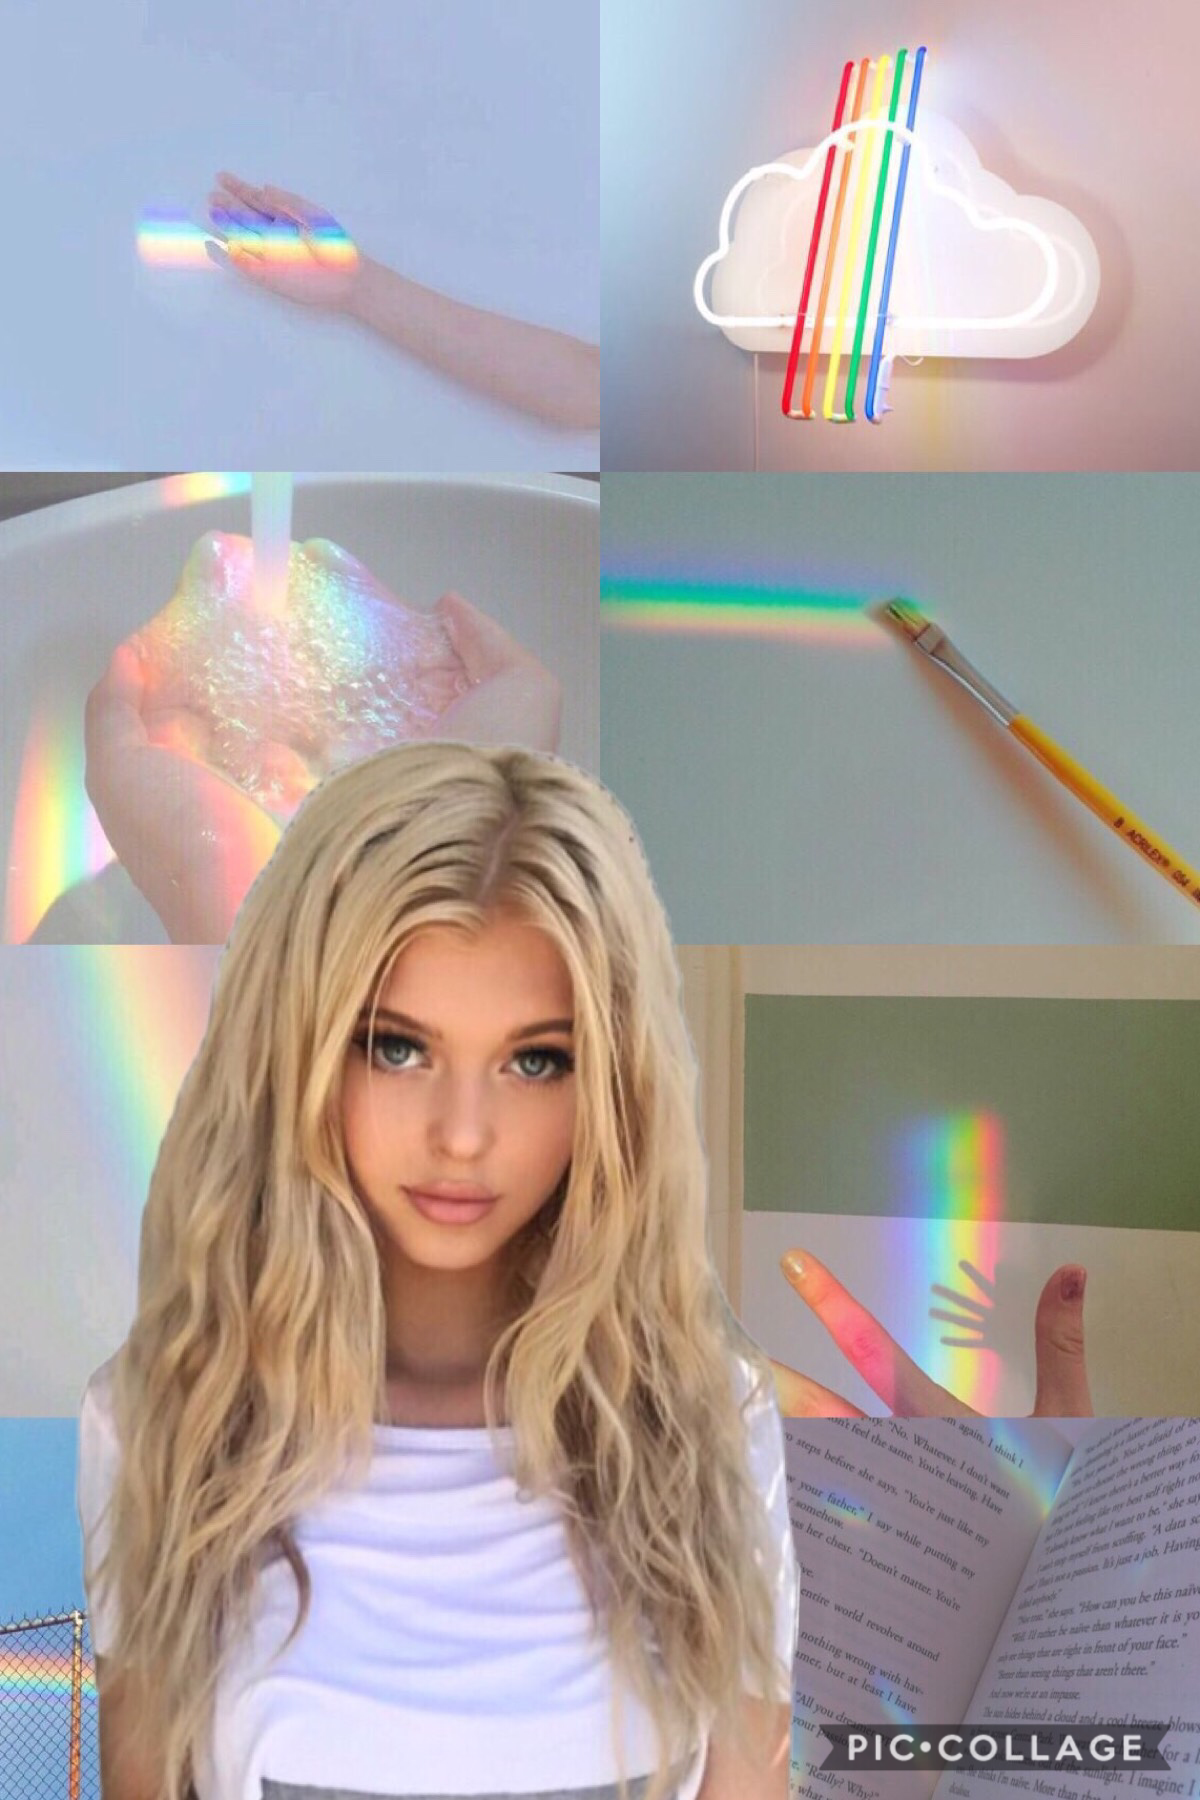 Hey guys so I post mostly Loren edits cuz I’m her biggest fan ❤️❤️but I will occasionally do other edits